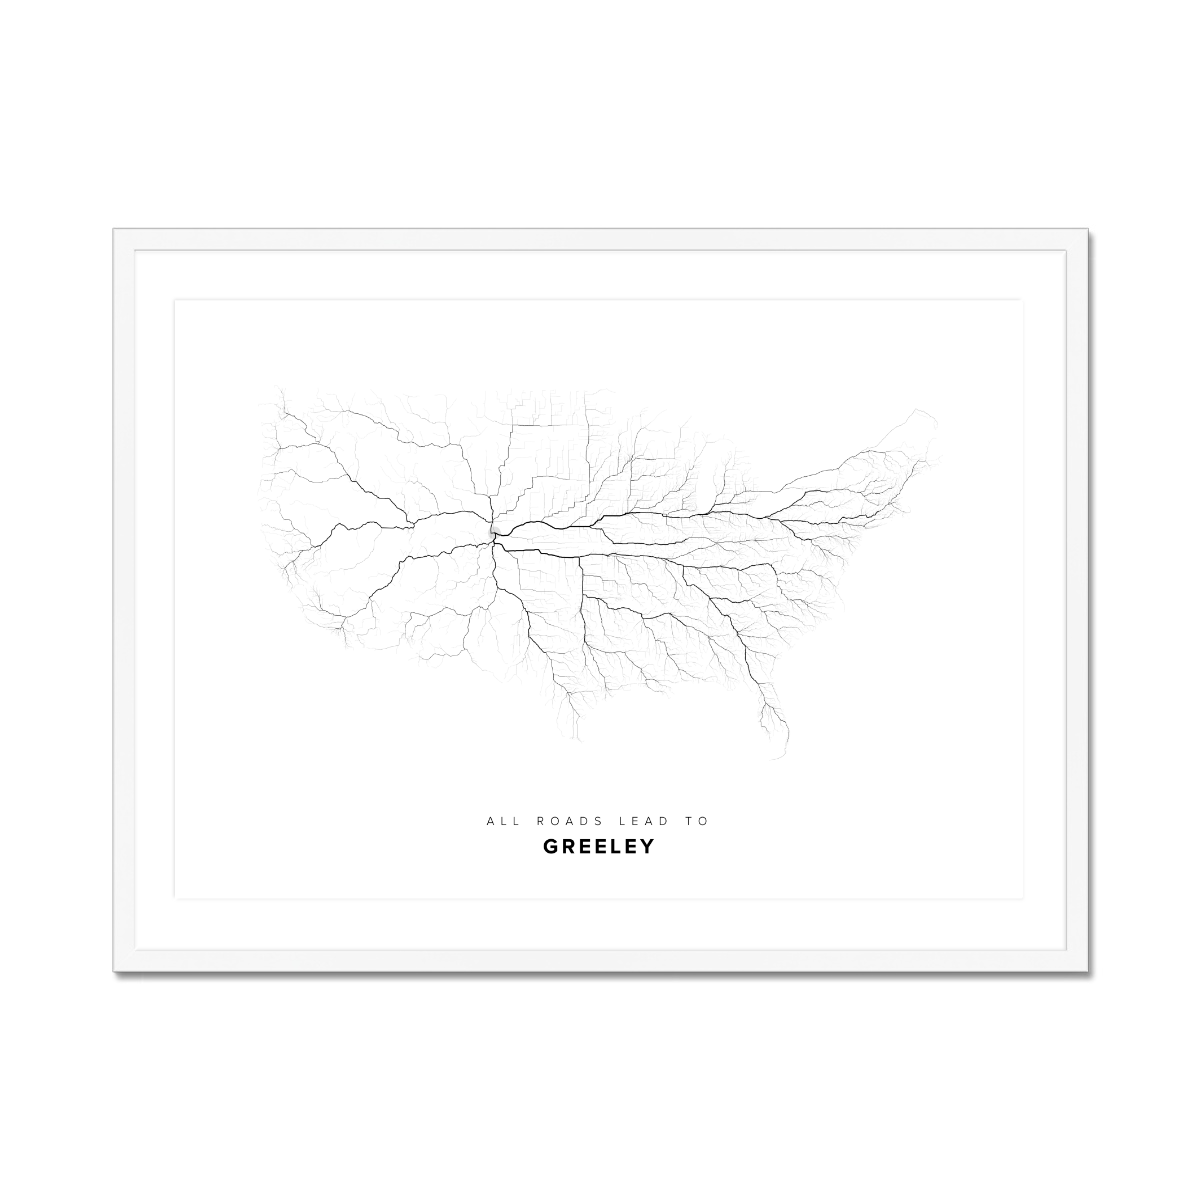 All roads lead to Greeley (United States of America) Fine Art Map Print